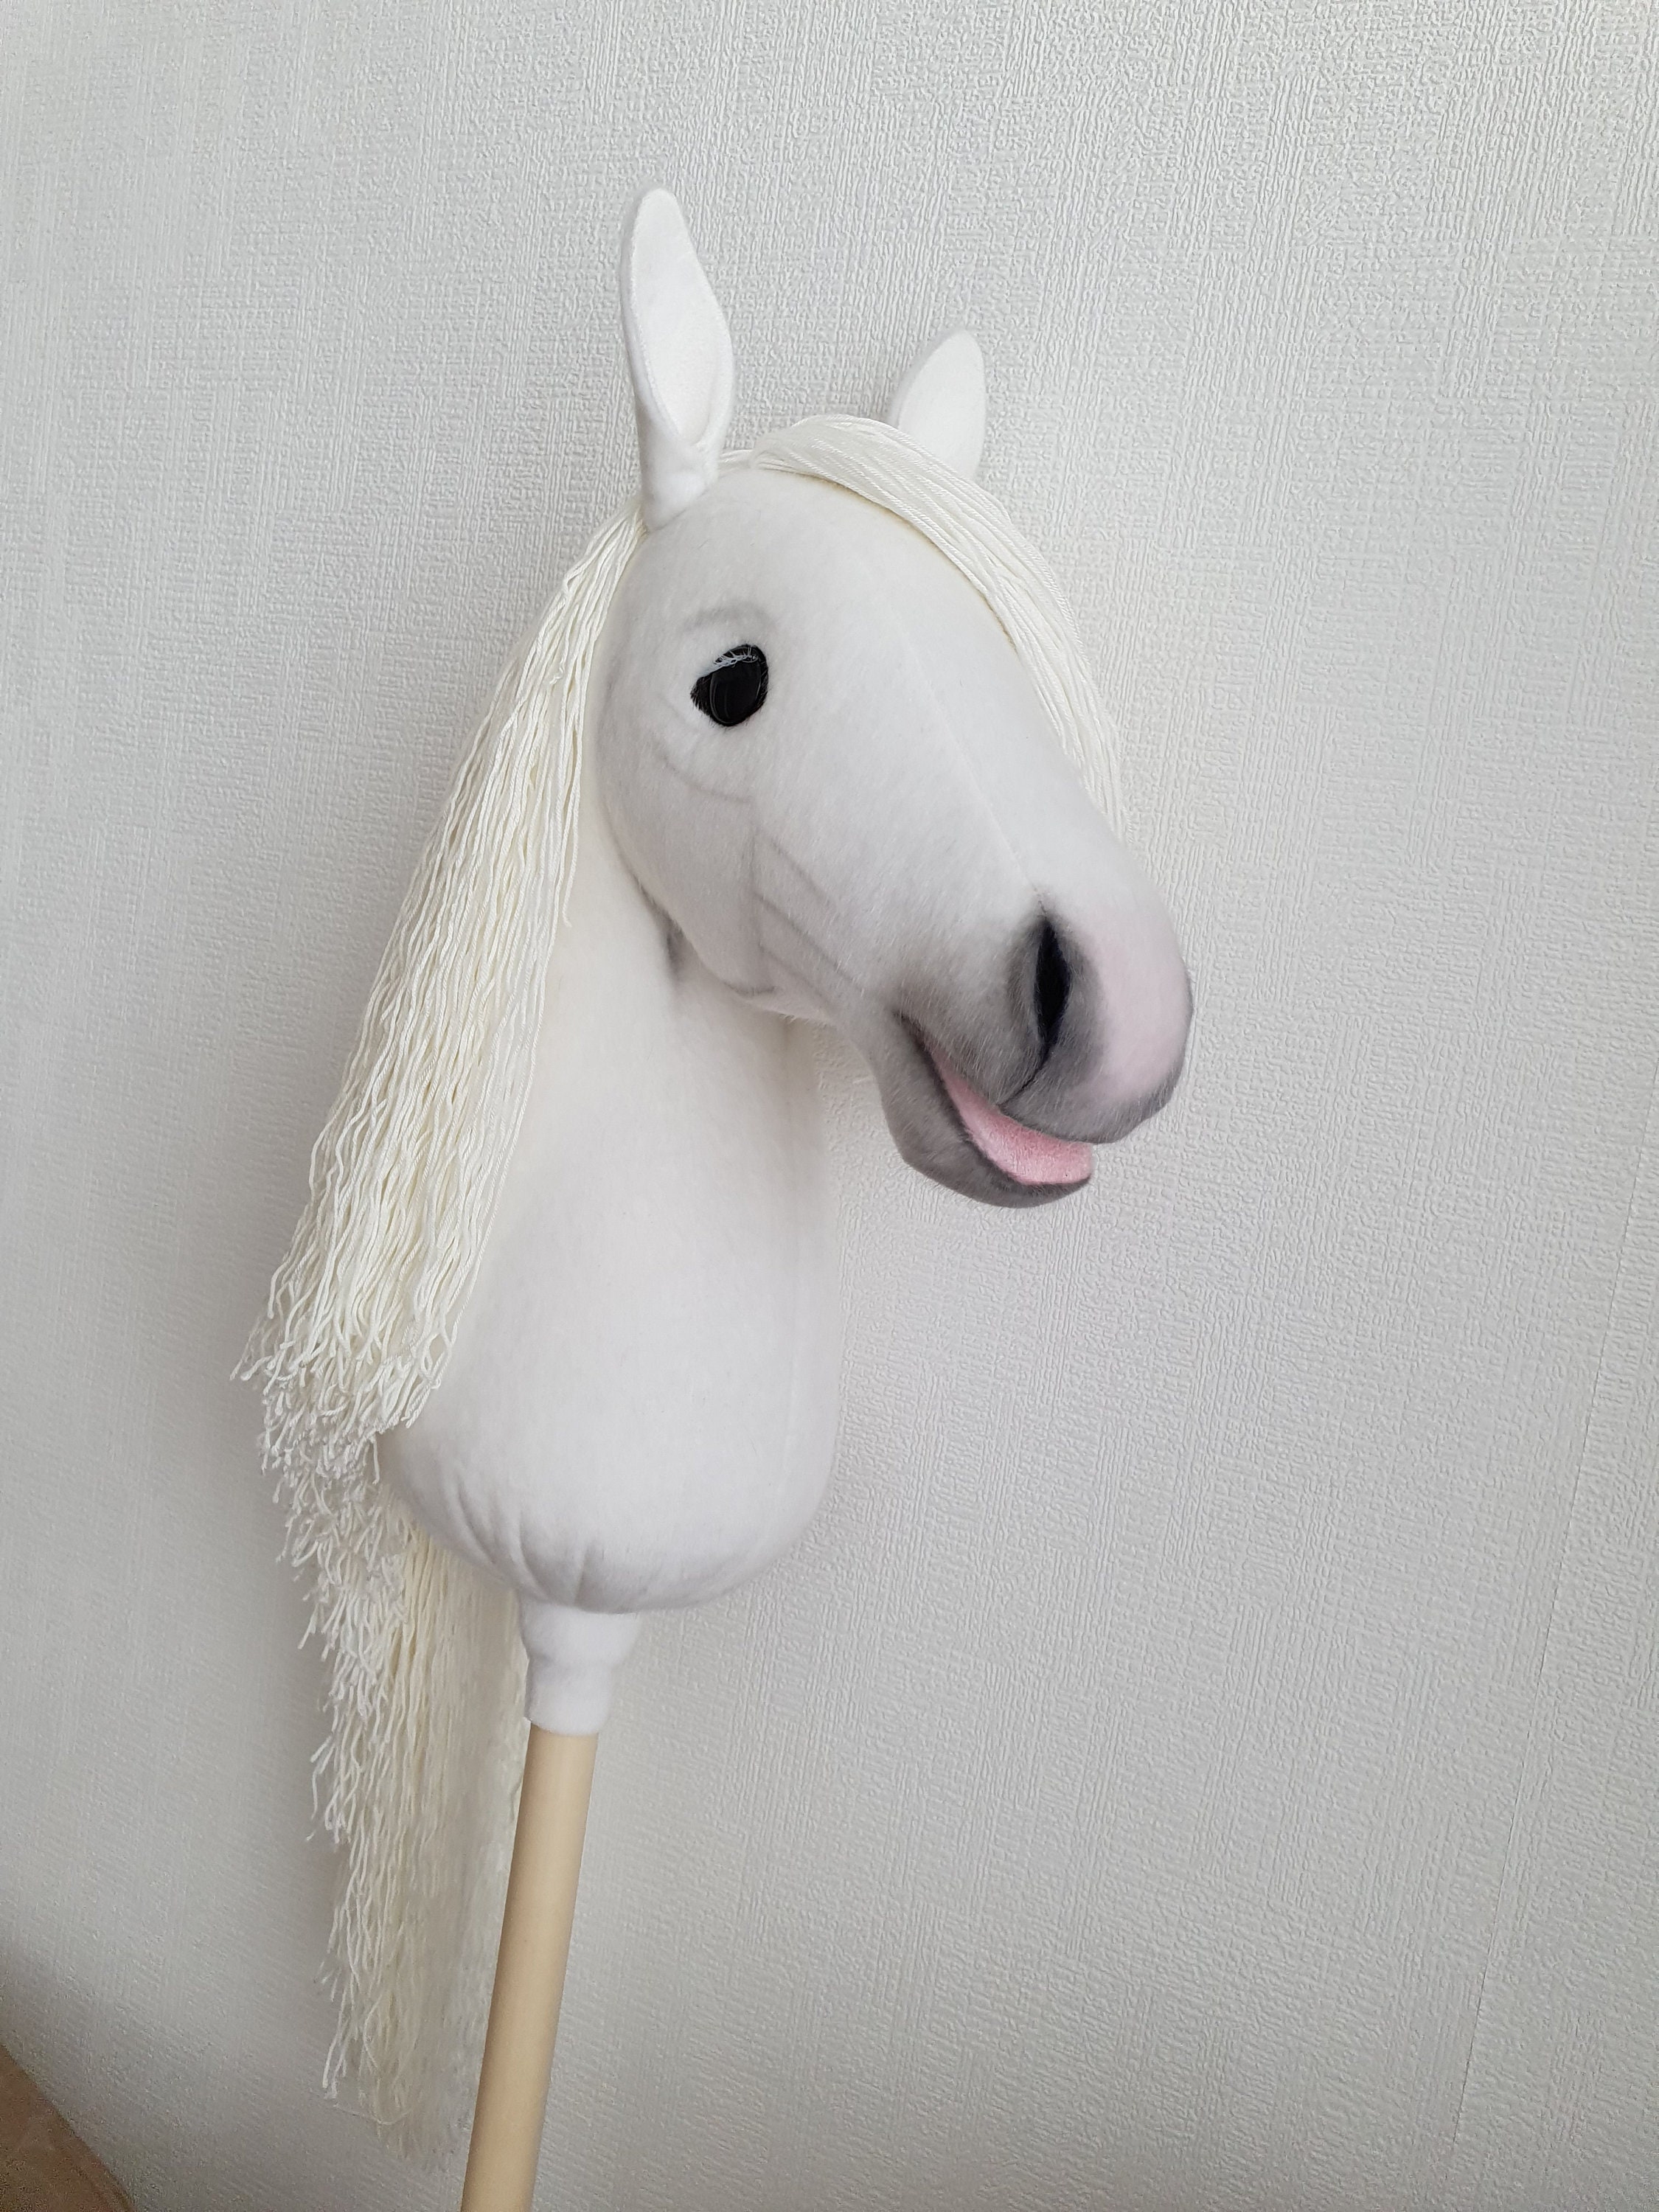 Hobby Horse on a Stick With Leather Bridle, Halter, Comb,brush,carrot,  Equine Passport for Hobby Horsing Outdoor Play and Competition 